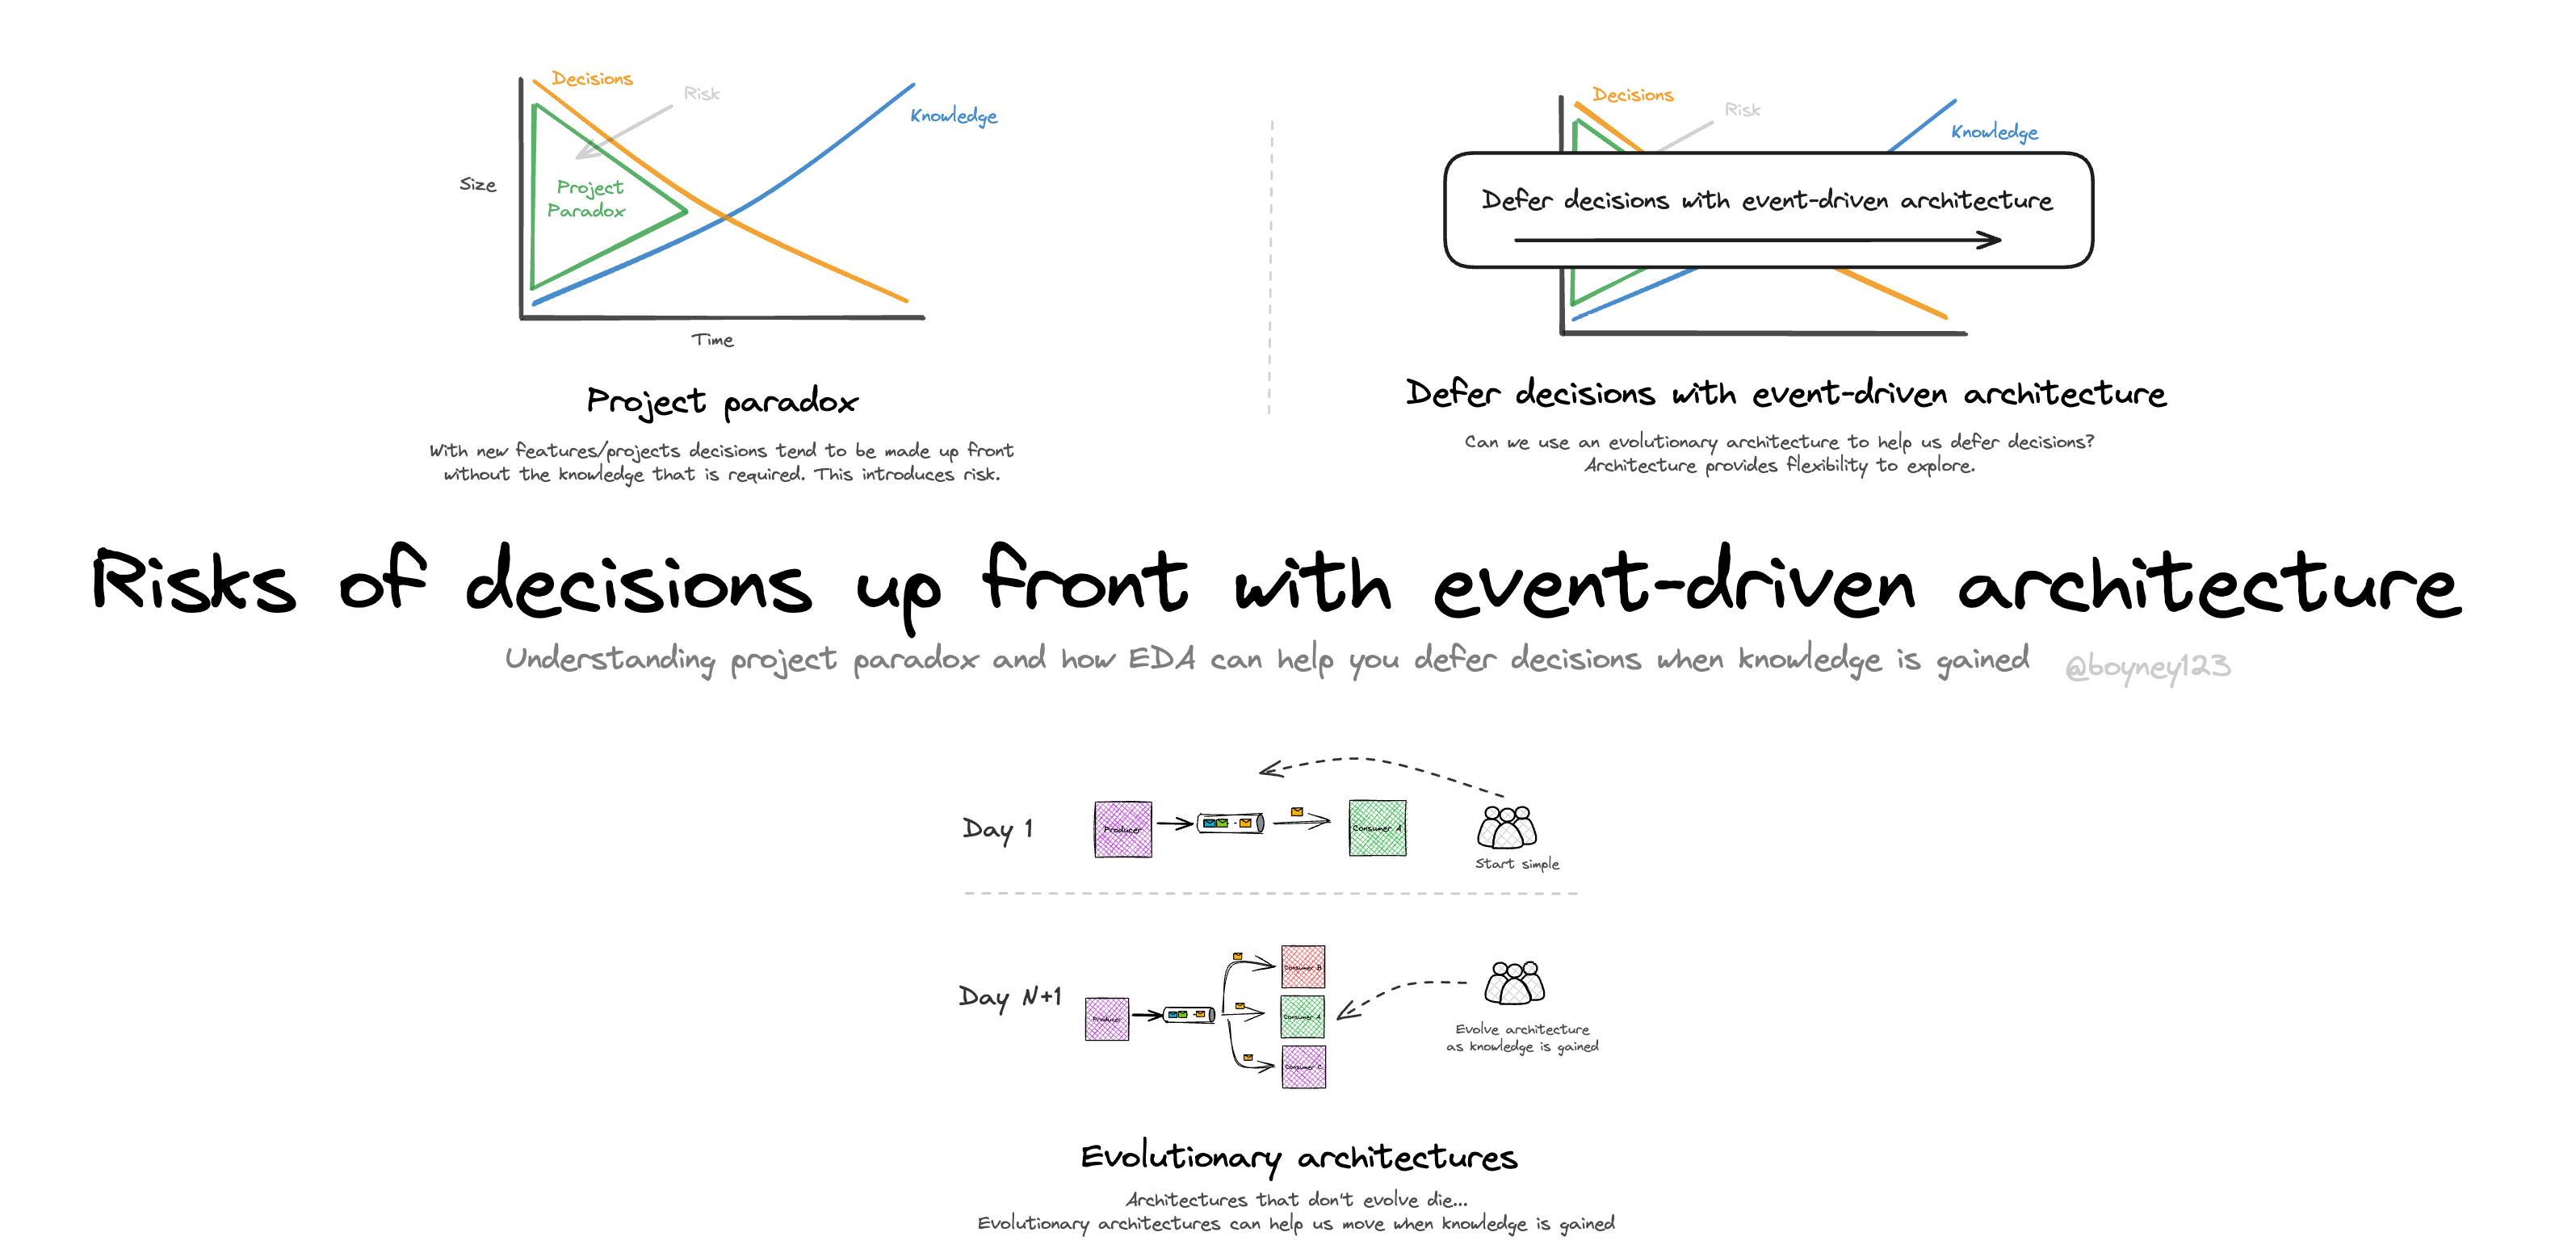 Risks of decisions up front with event-driven architecture